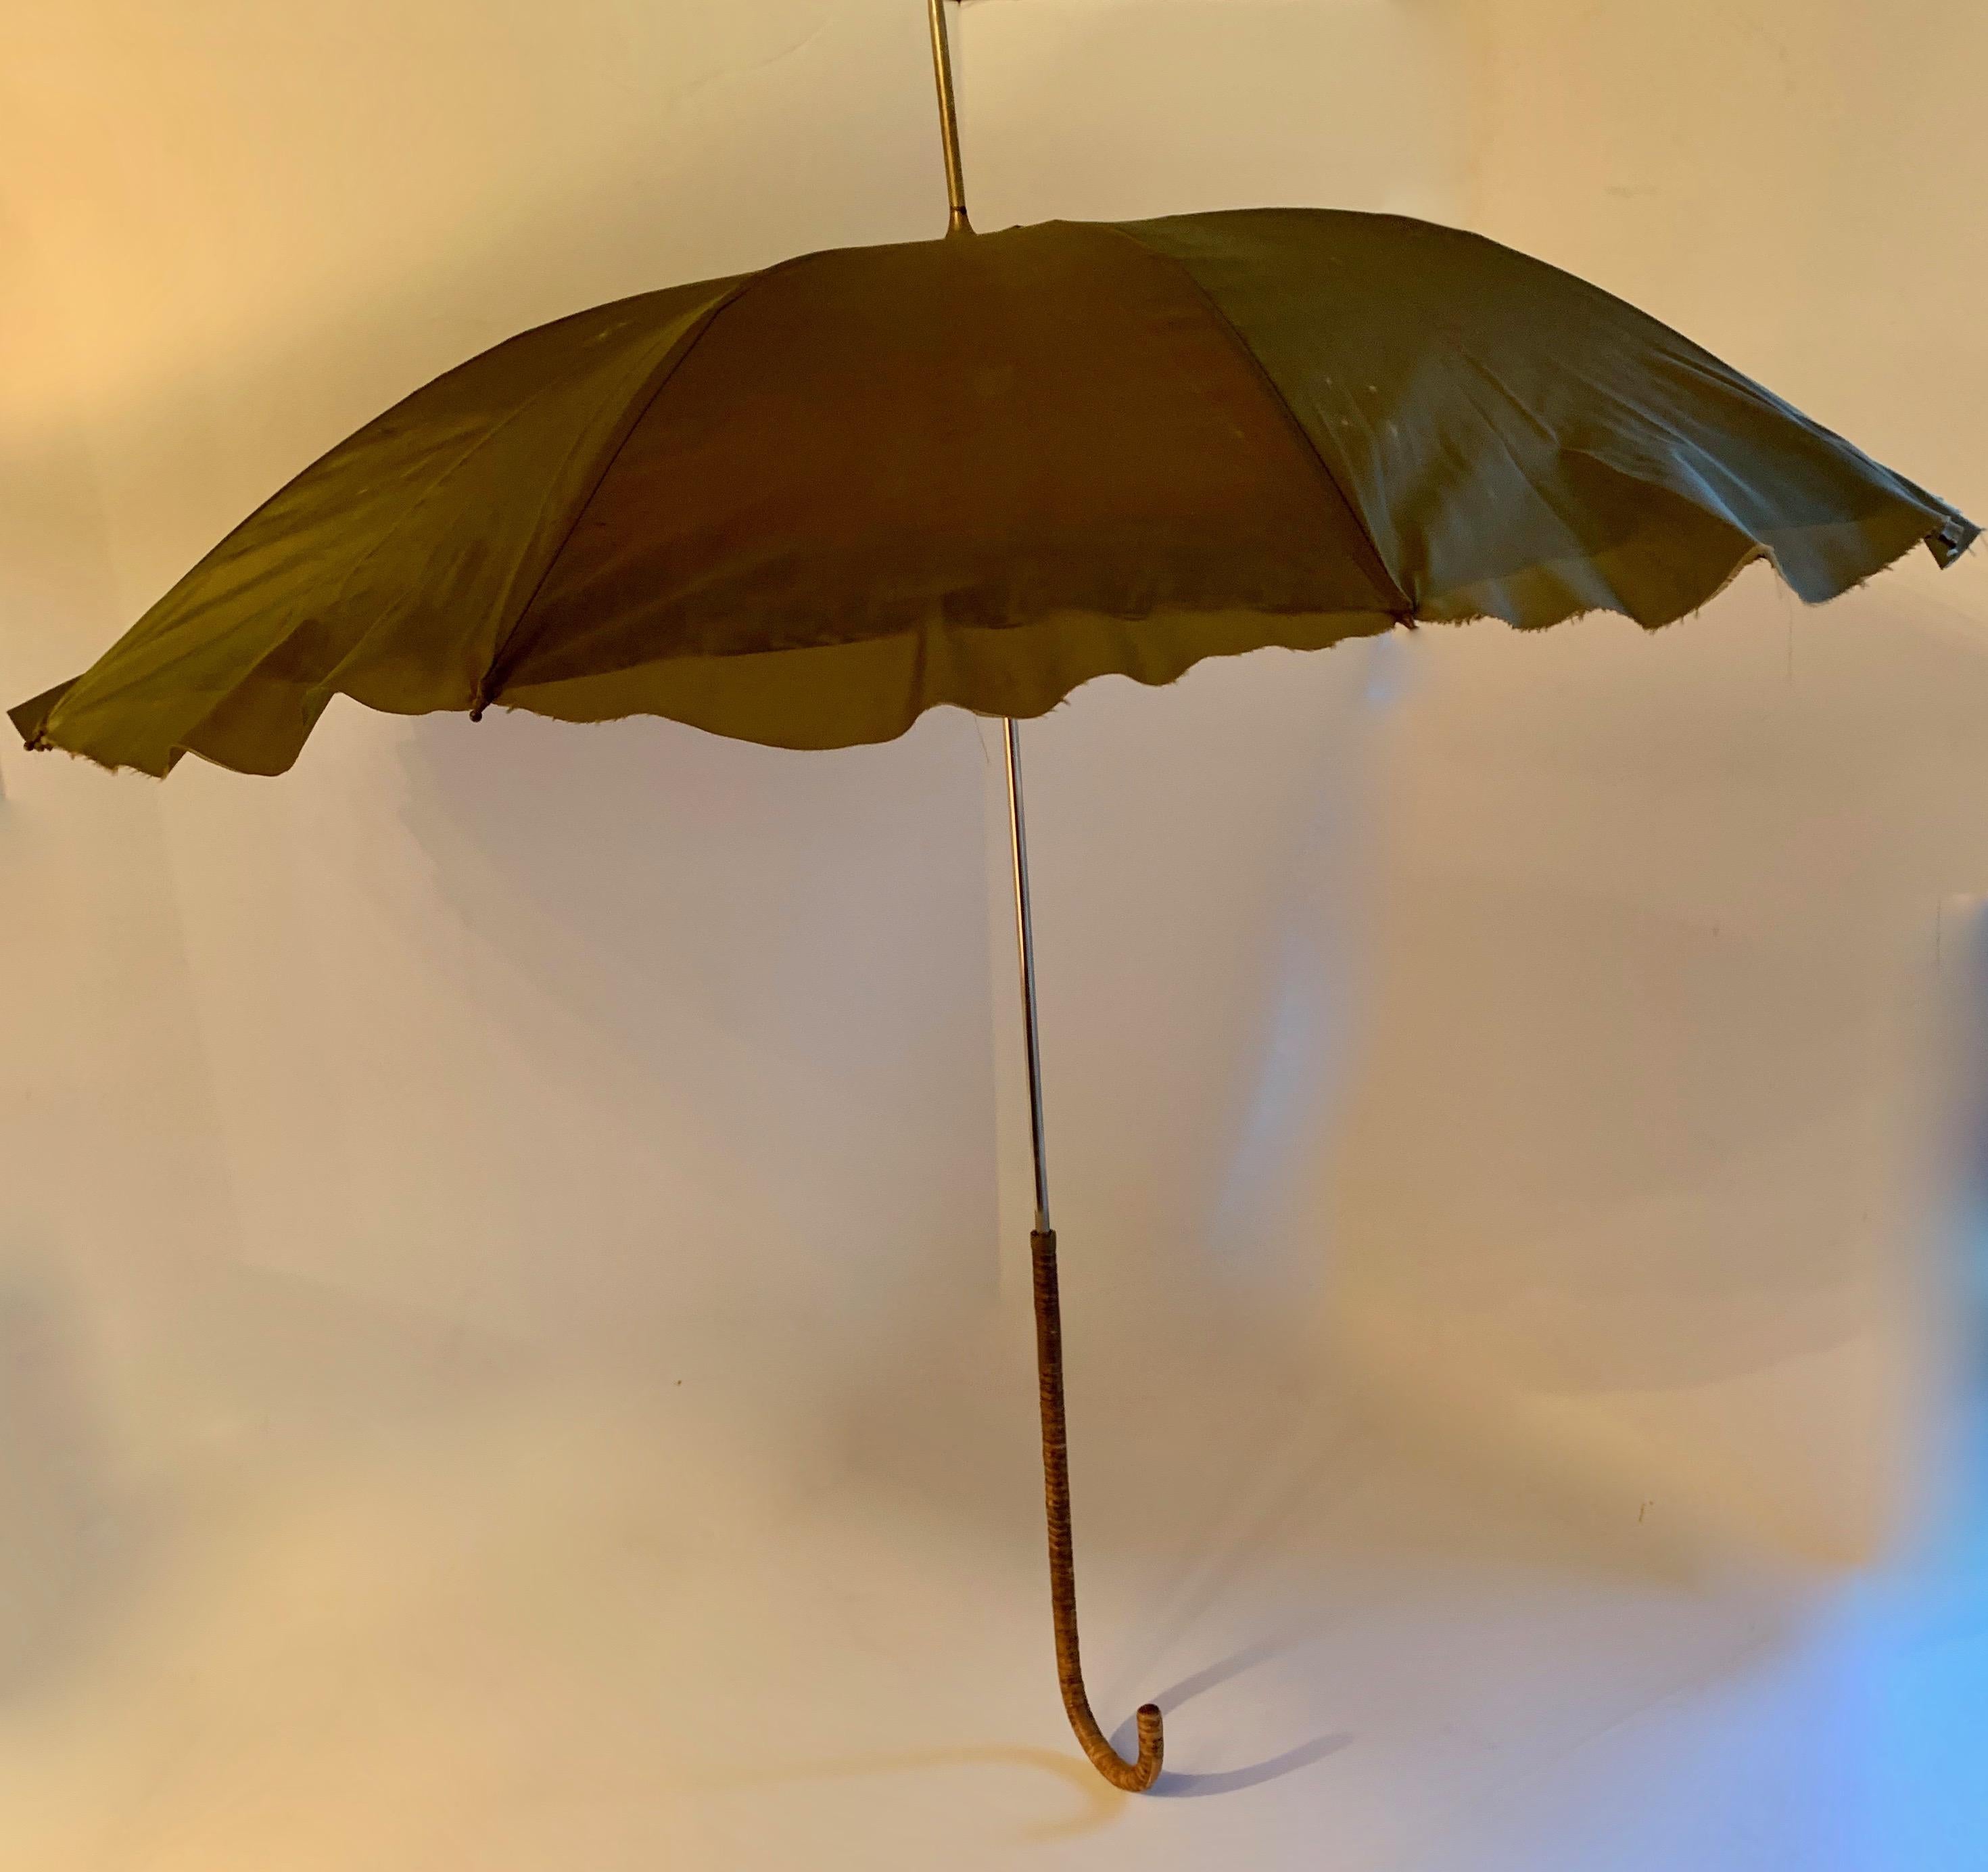 Victorian umbrella with cane handle - a unique and handsome piece, the umbrella is held in place with a 'snake' band. When open, the fabric is a melange of color and texture, with a raw edge. The handle is a beautiful woven cane... Very good vintage